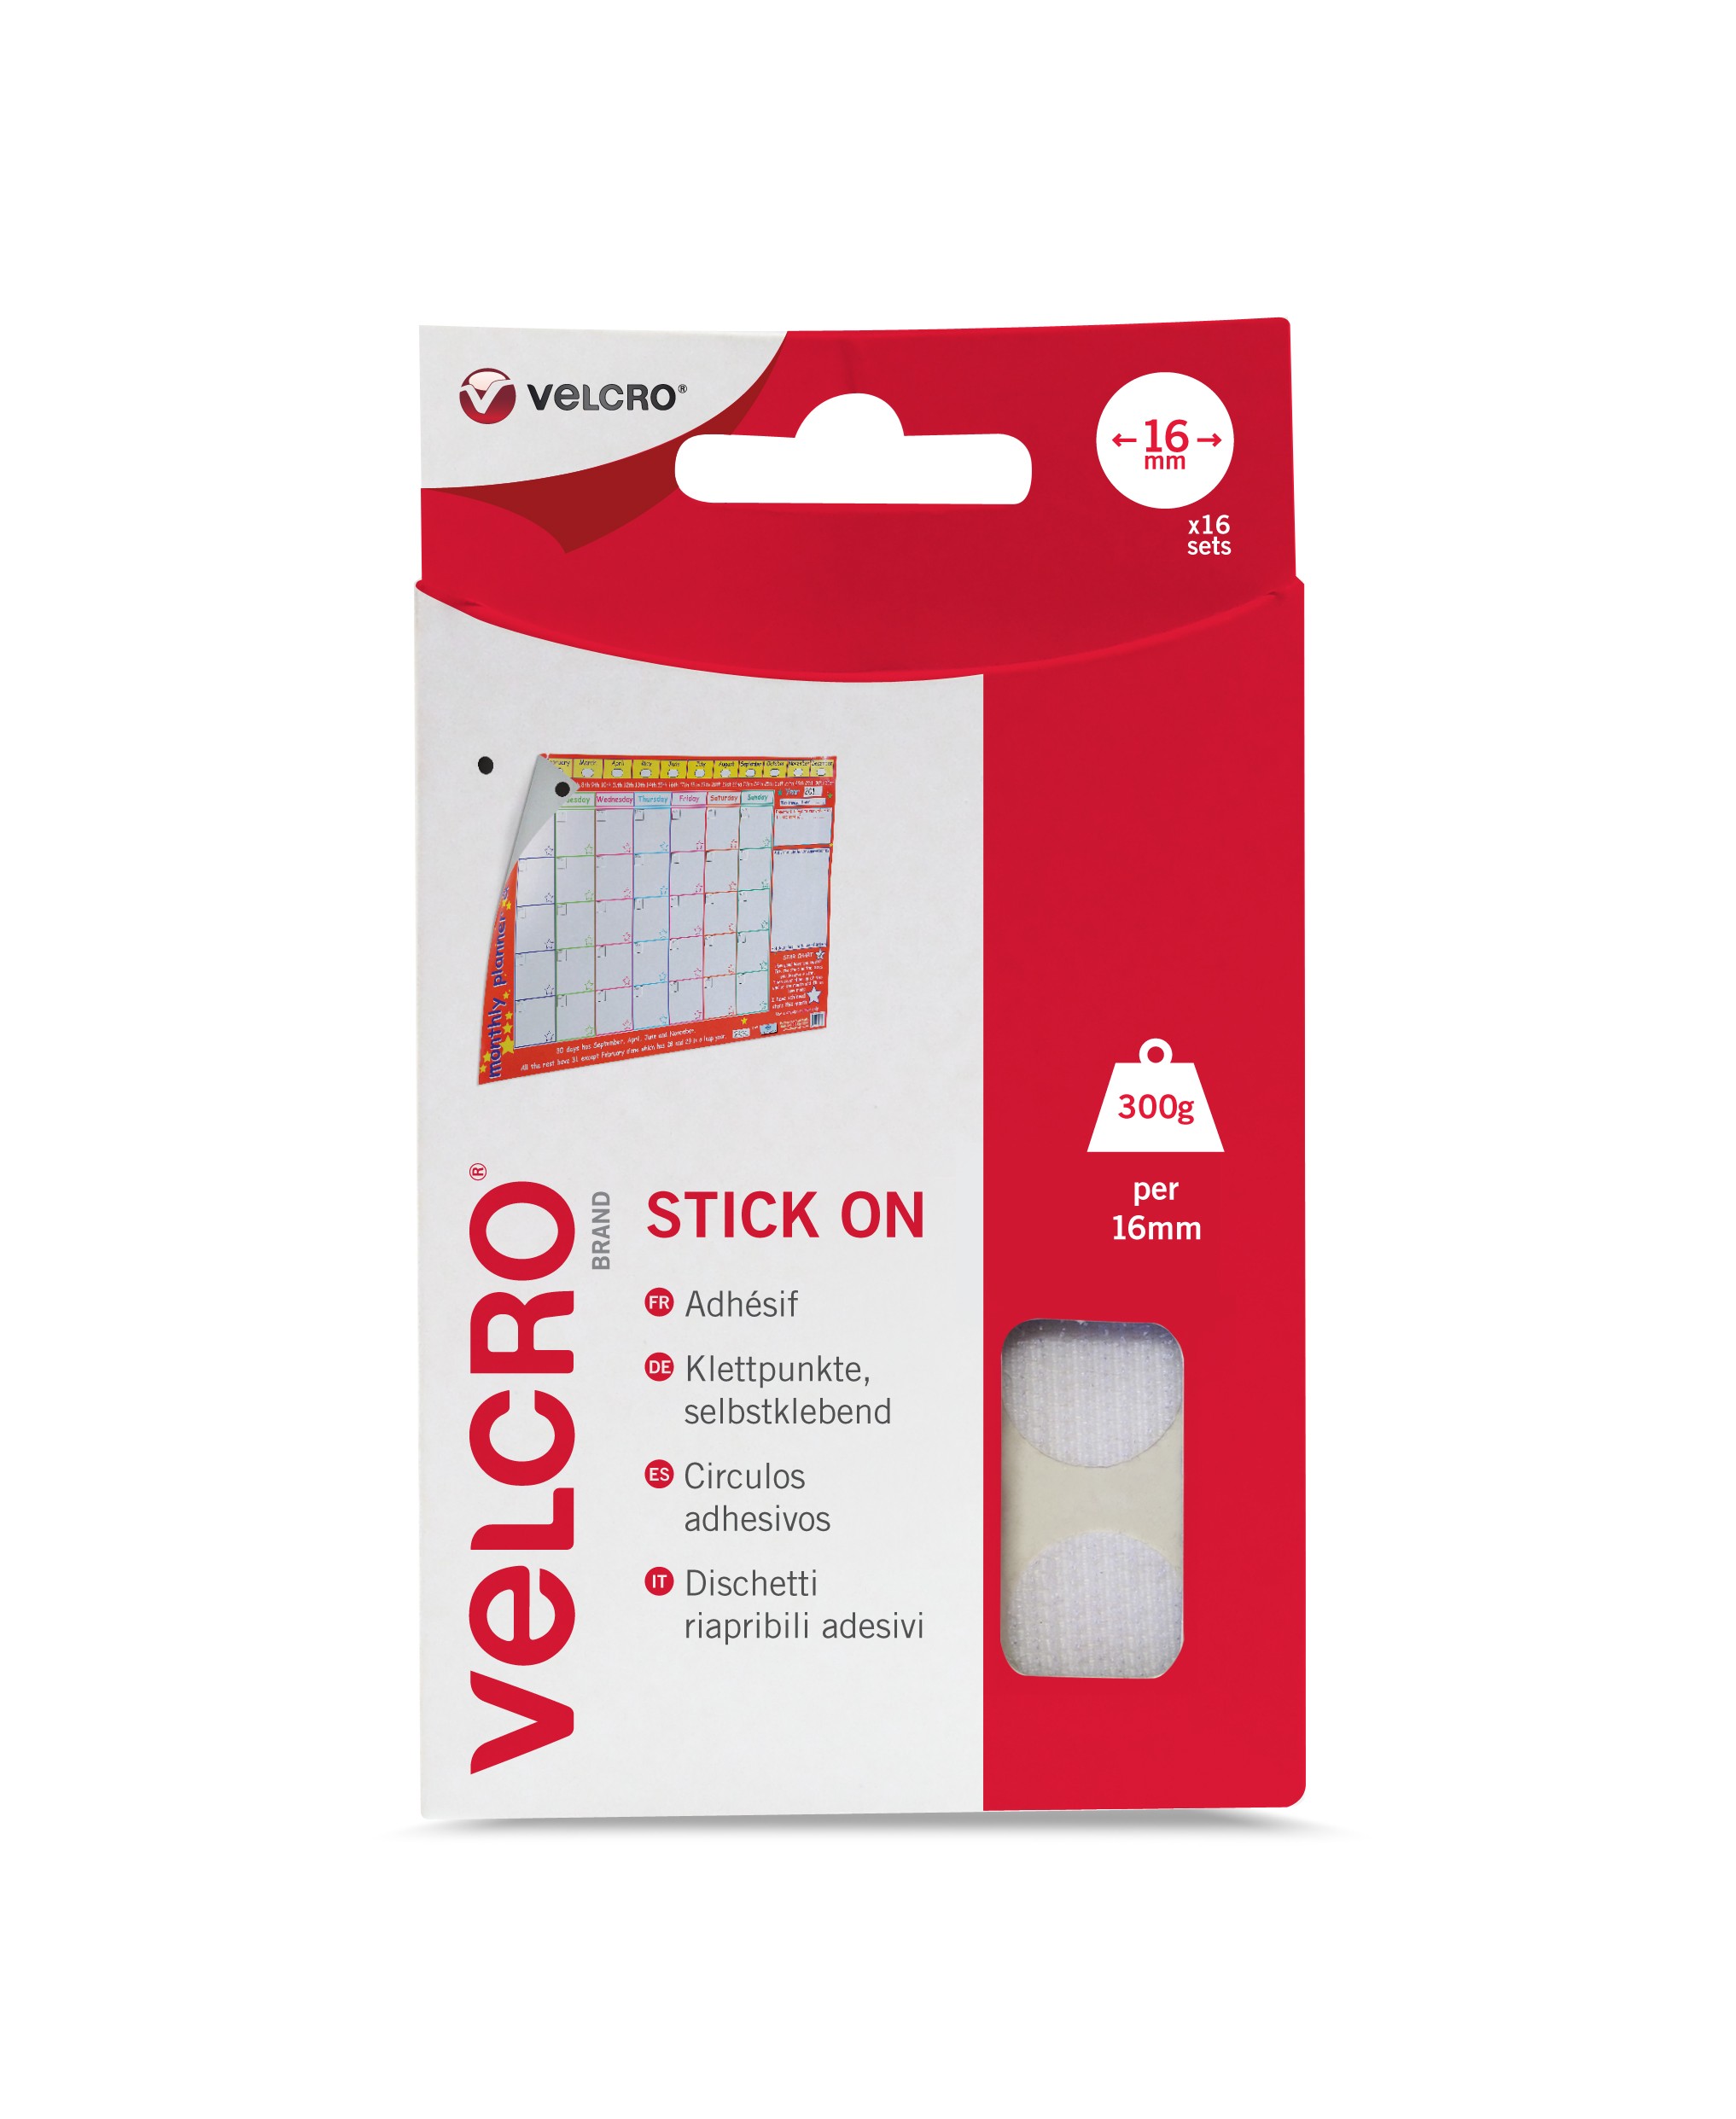 Accessories Velcro Sticky Hook and Loop Spots 16mm 16 Sets White